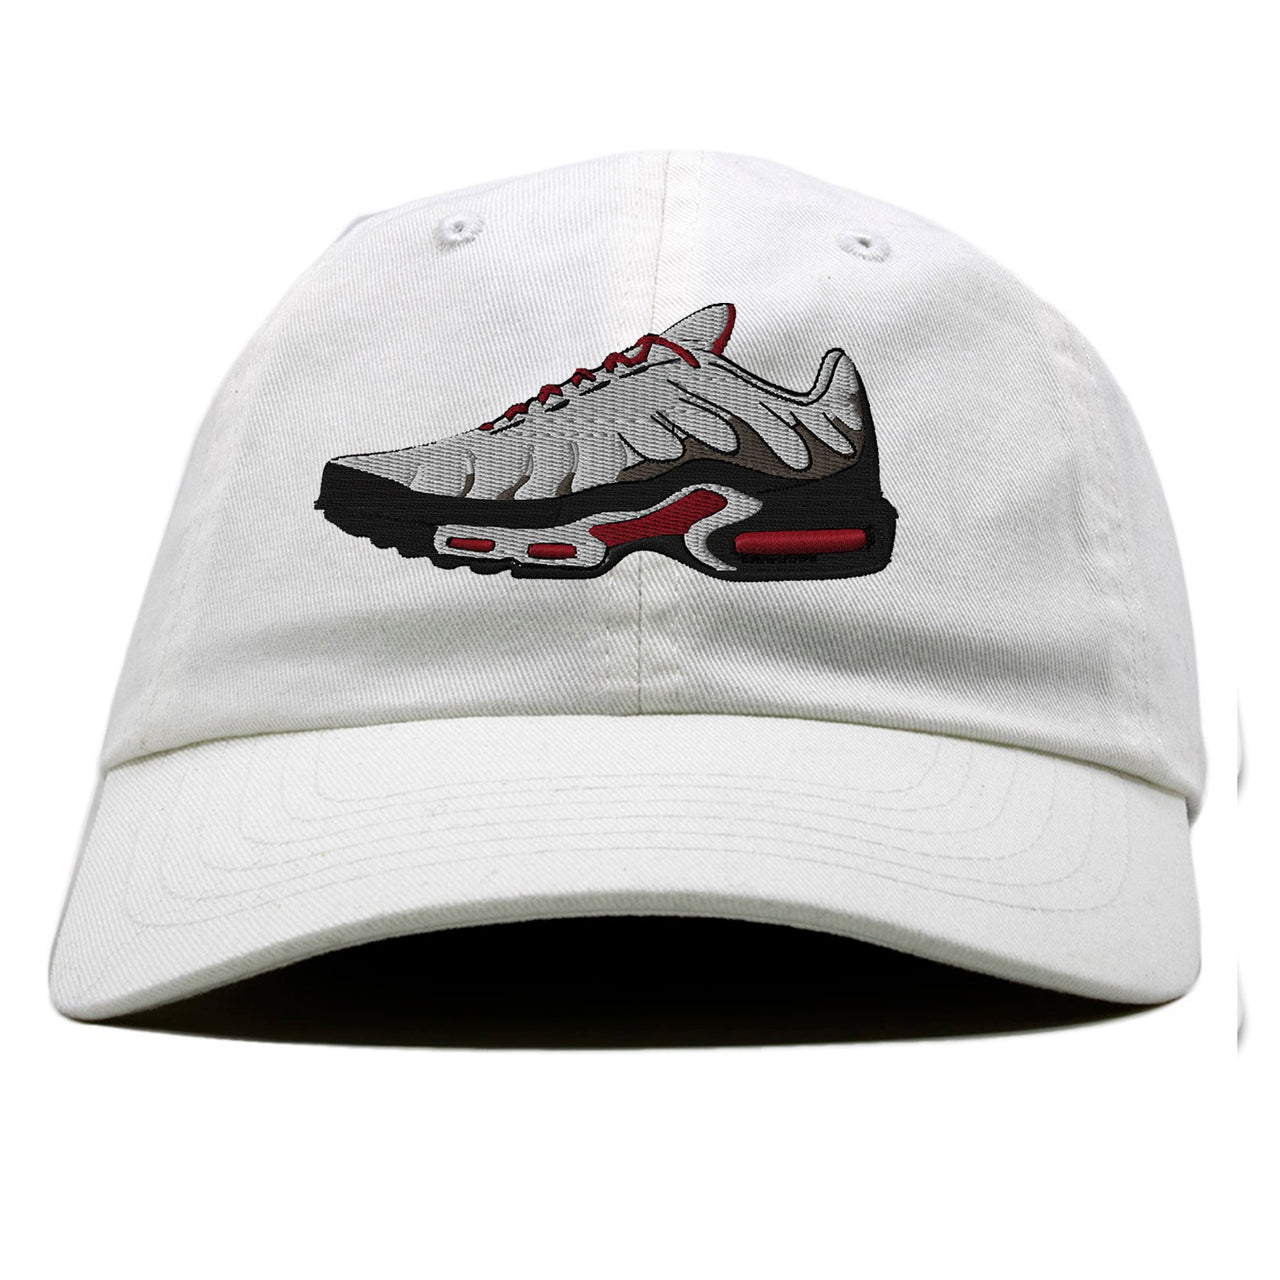 White University Red Pluses Dad Hat | Shoe, White